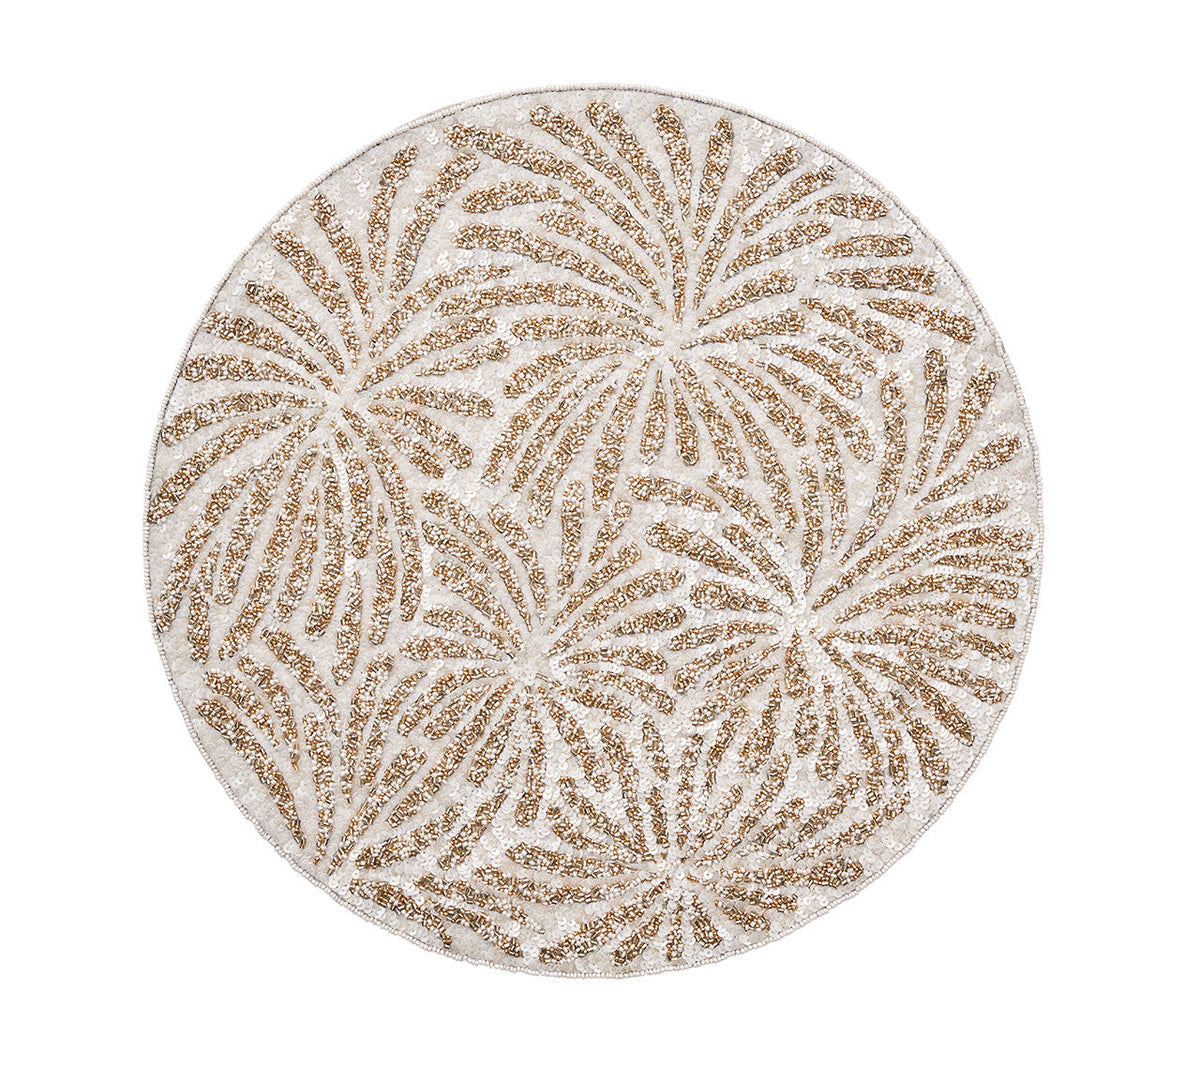  Round Fireworks Placemat in metallic silver and gold 